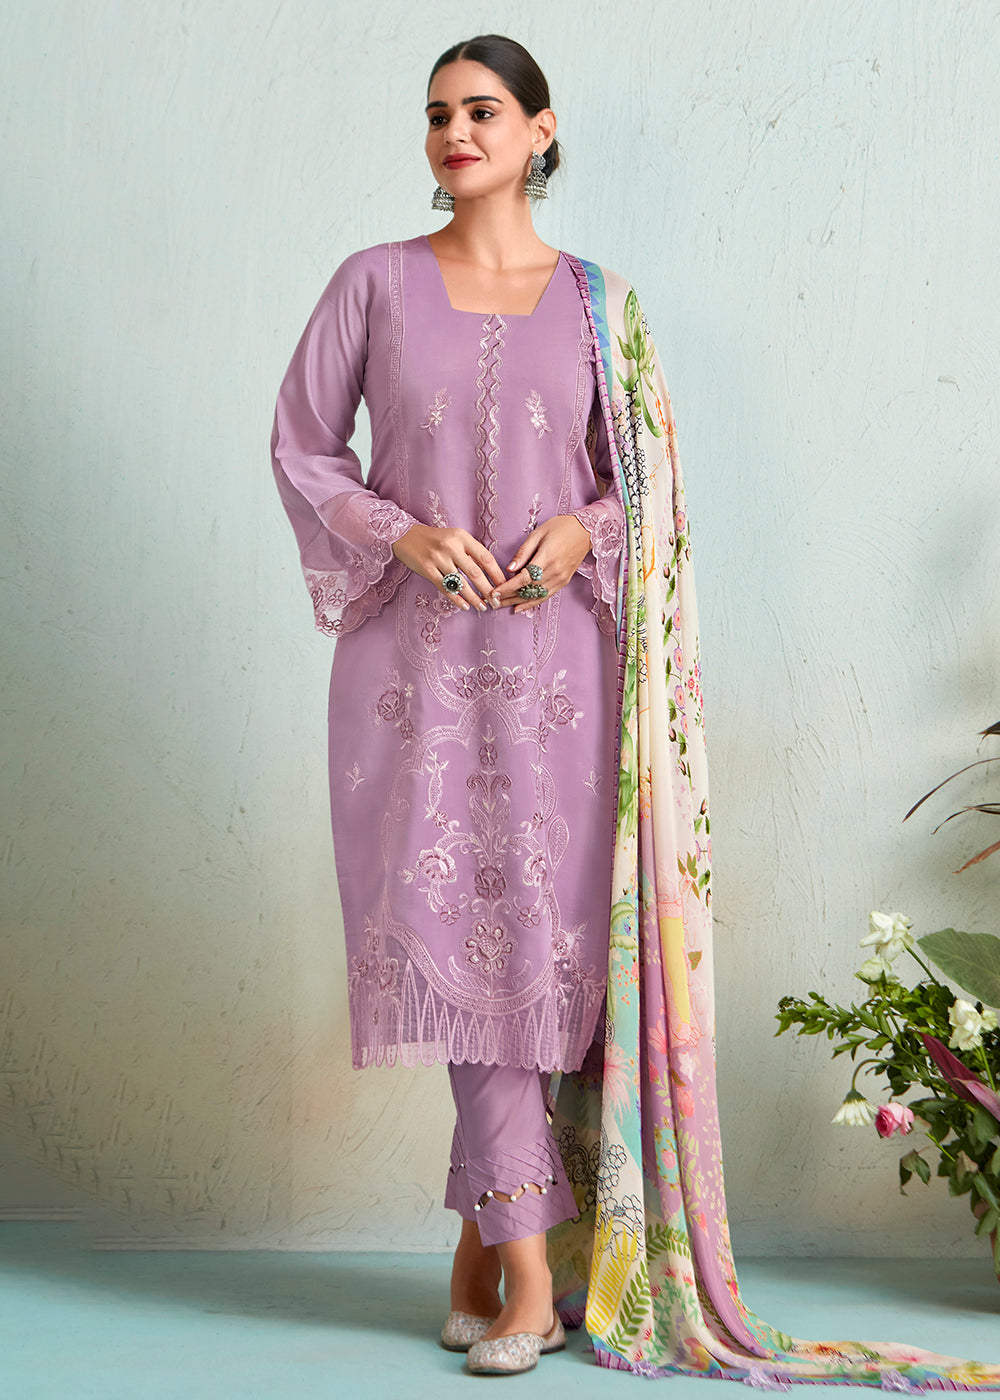 Buy Now Lilac Pink Pure Muslin Resham Embroidered Salwar Suit Online in USA, UK, Canada, Germany, Australia & Worldwide at Empress Clothing. 